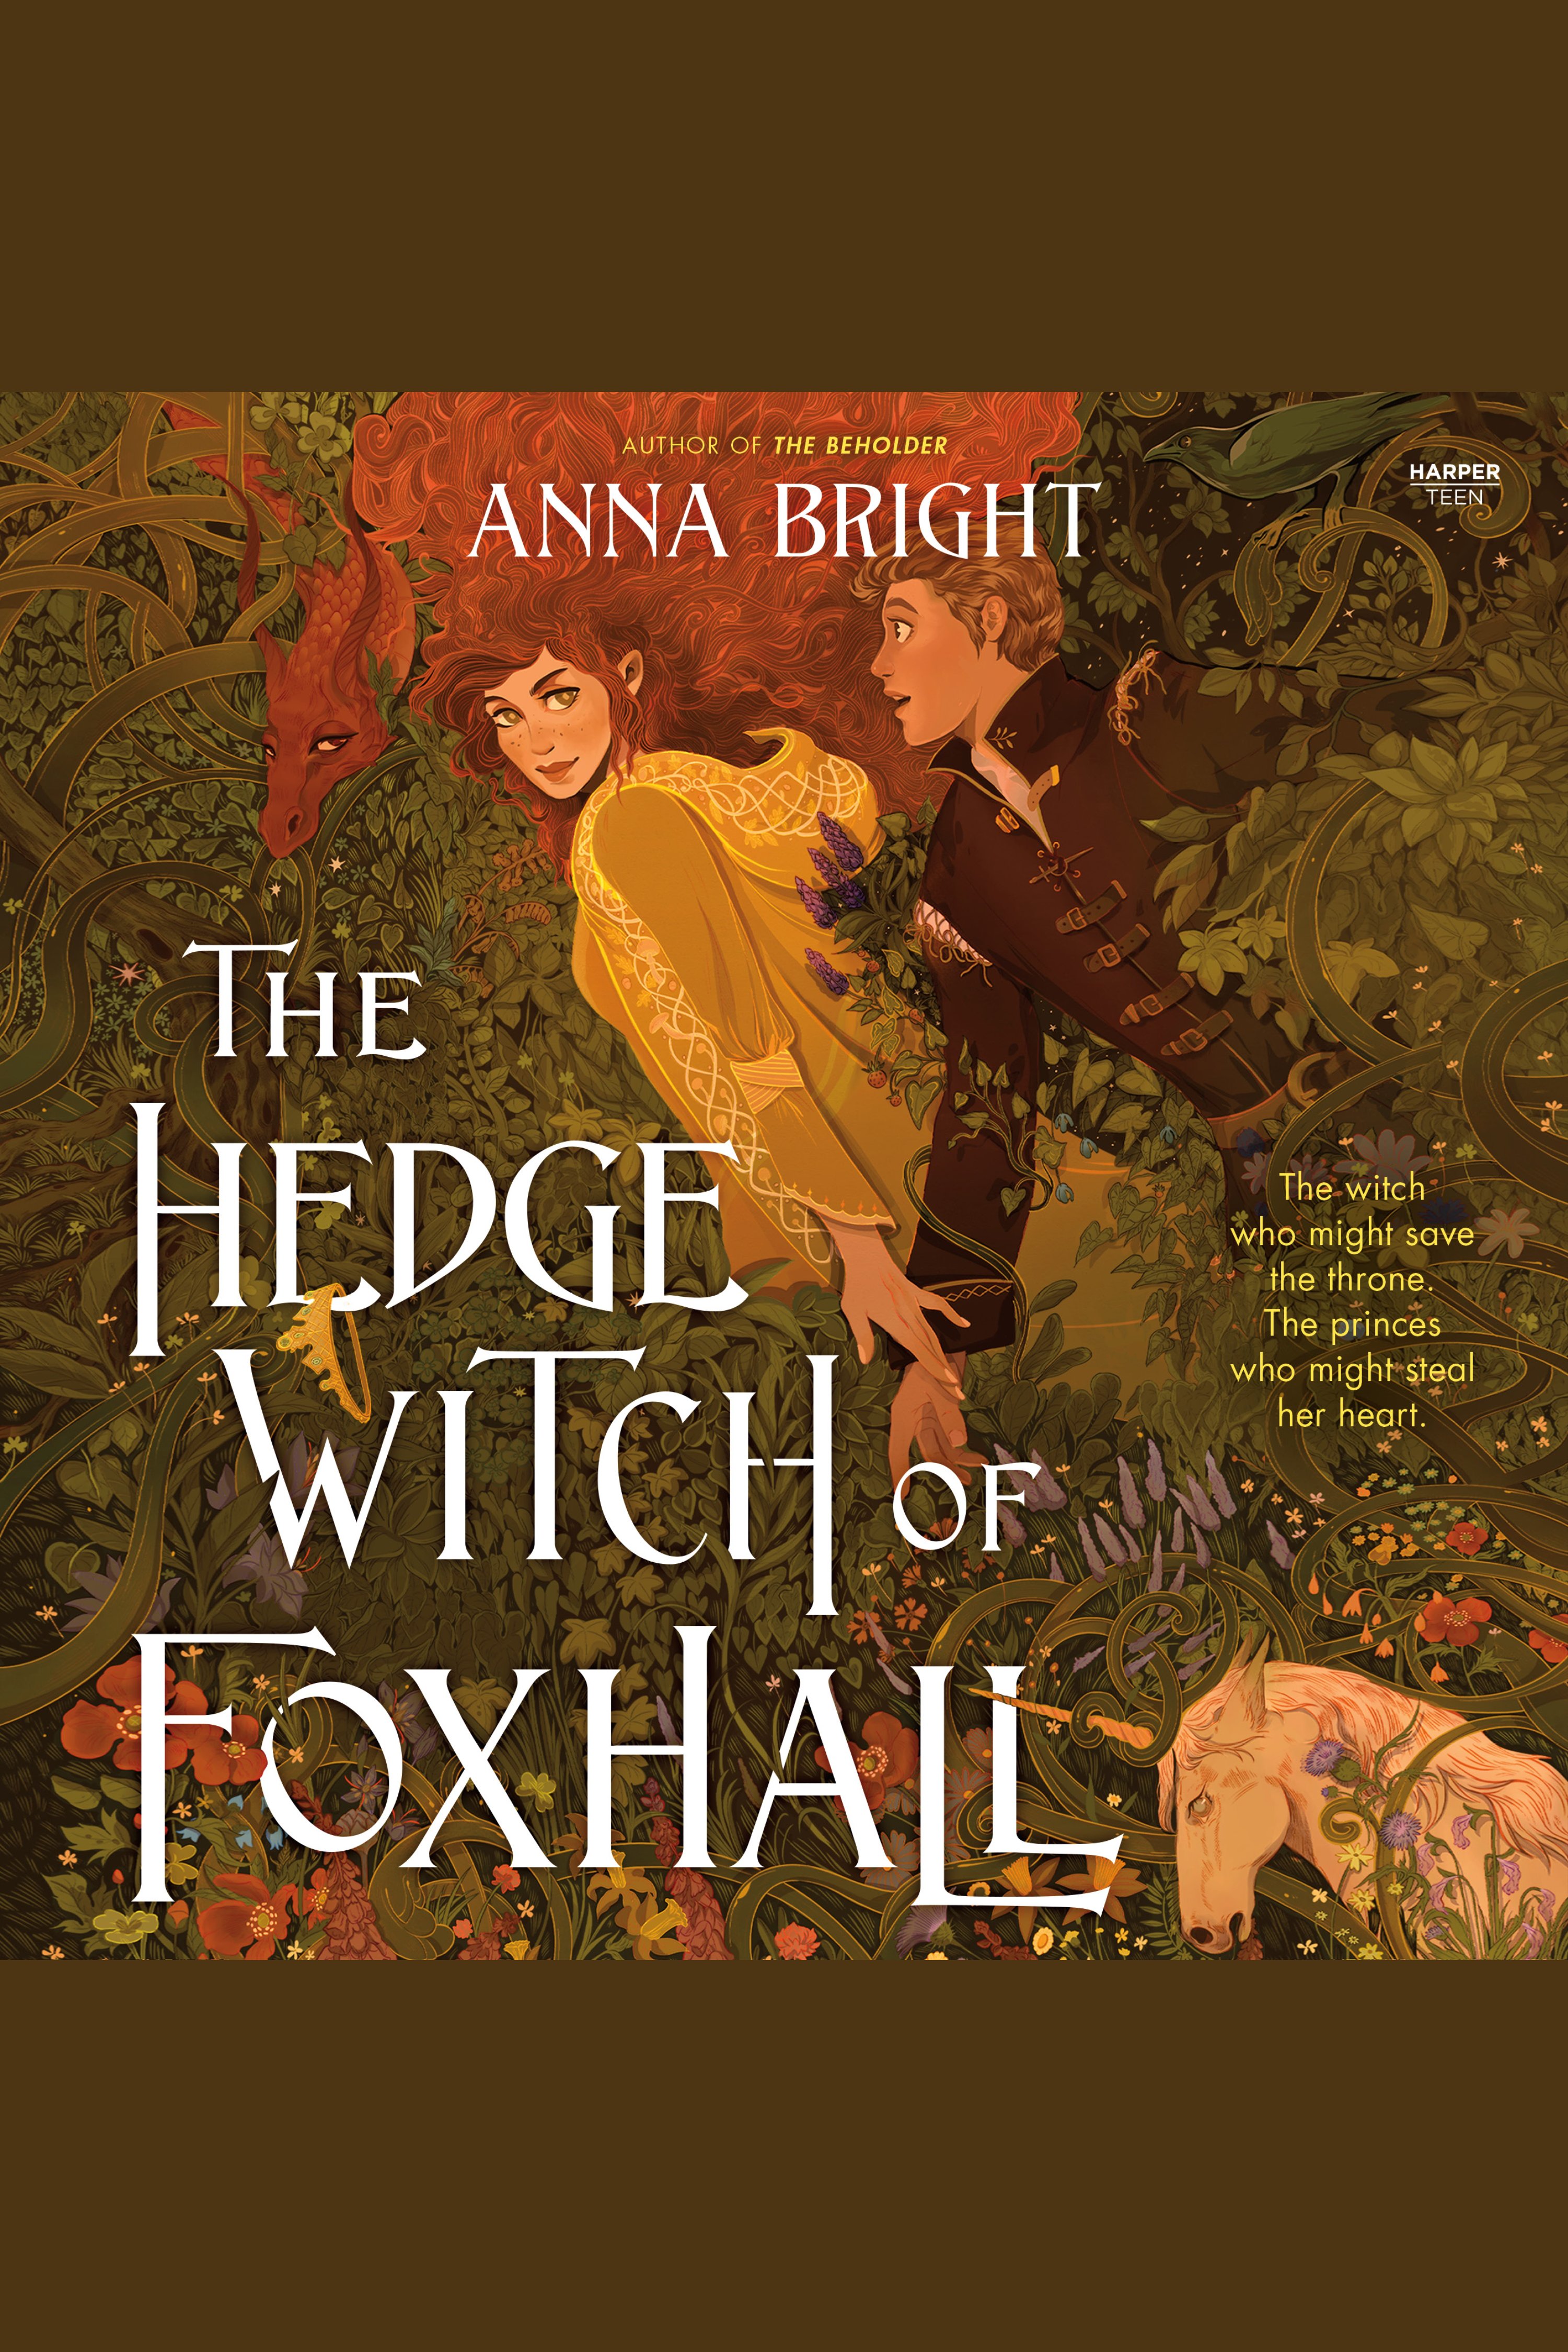 The Hedgewitch of Foxhall cover image